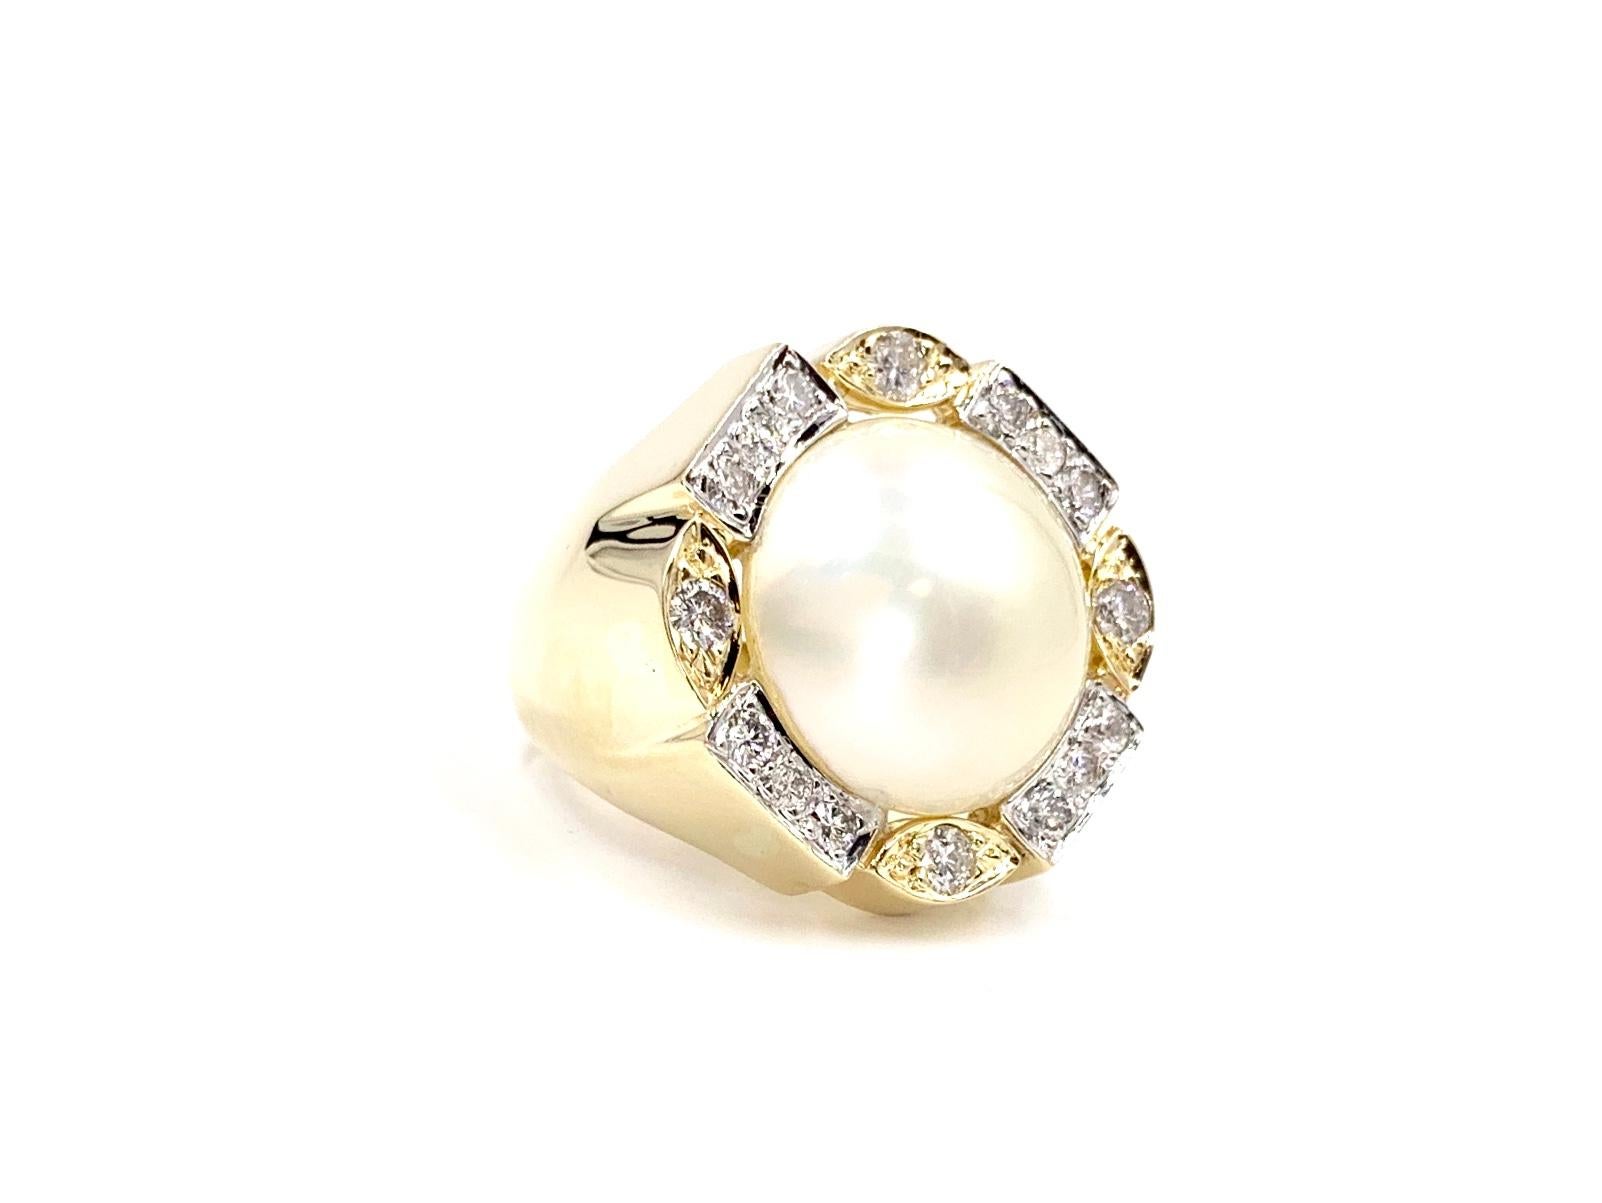 A well made, heavy 14 karat yellow and white gold mabe pearl ring featuring .80 carats of white round brilliant diamond. Diamond quality is approximately G color, SI2 clarity. 11.5mm Pearl is smooth and lustrous. Ring is a larger statement piece yet